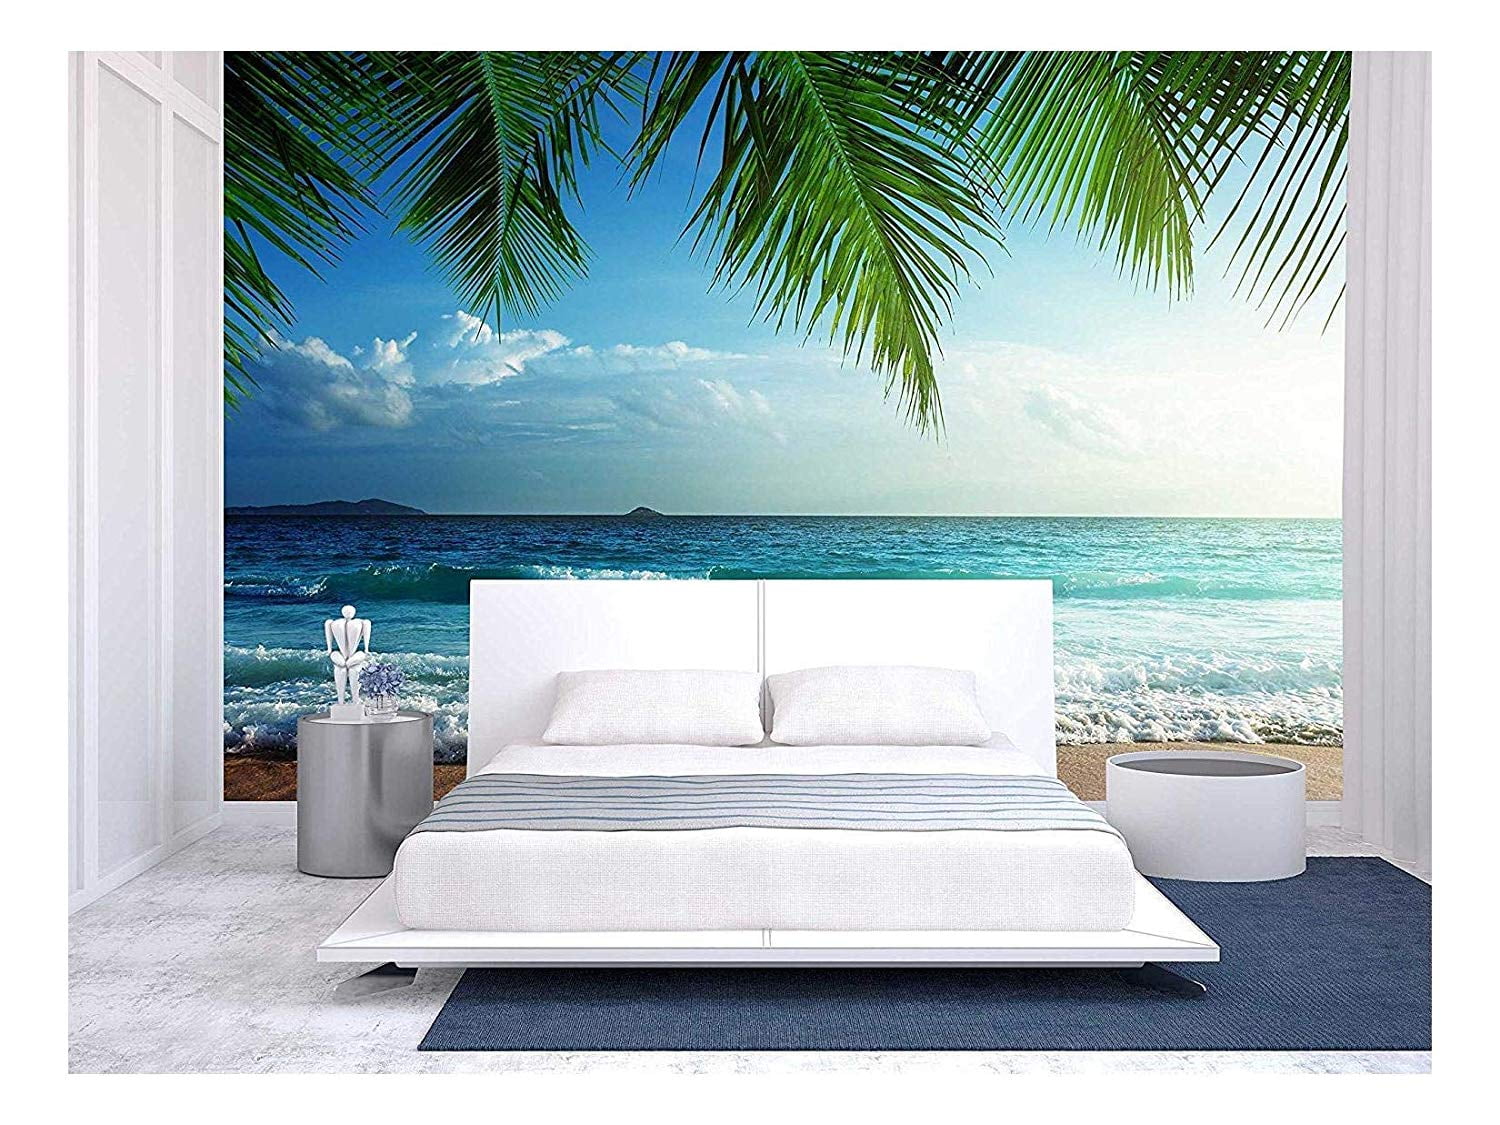 wall26 - Sunset on Seychelles Beach - Removable Wall Mural | Self